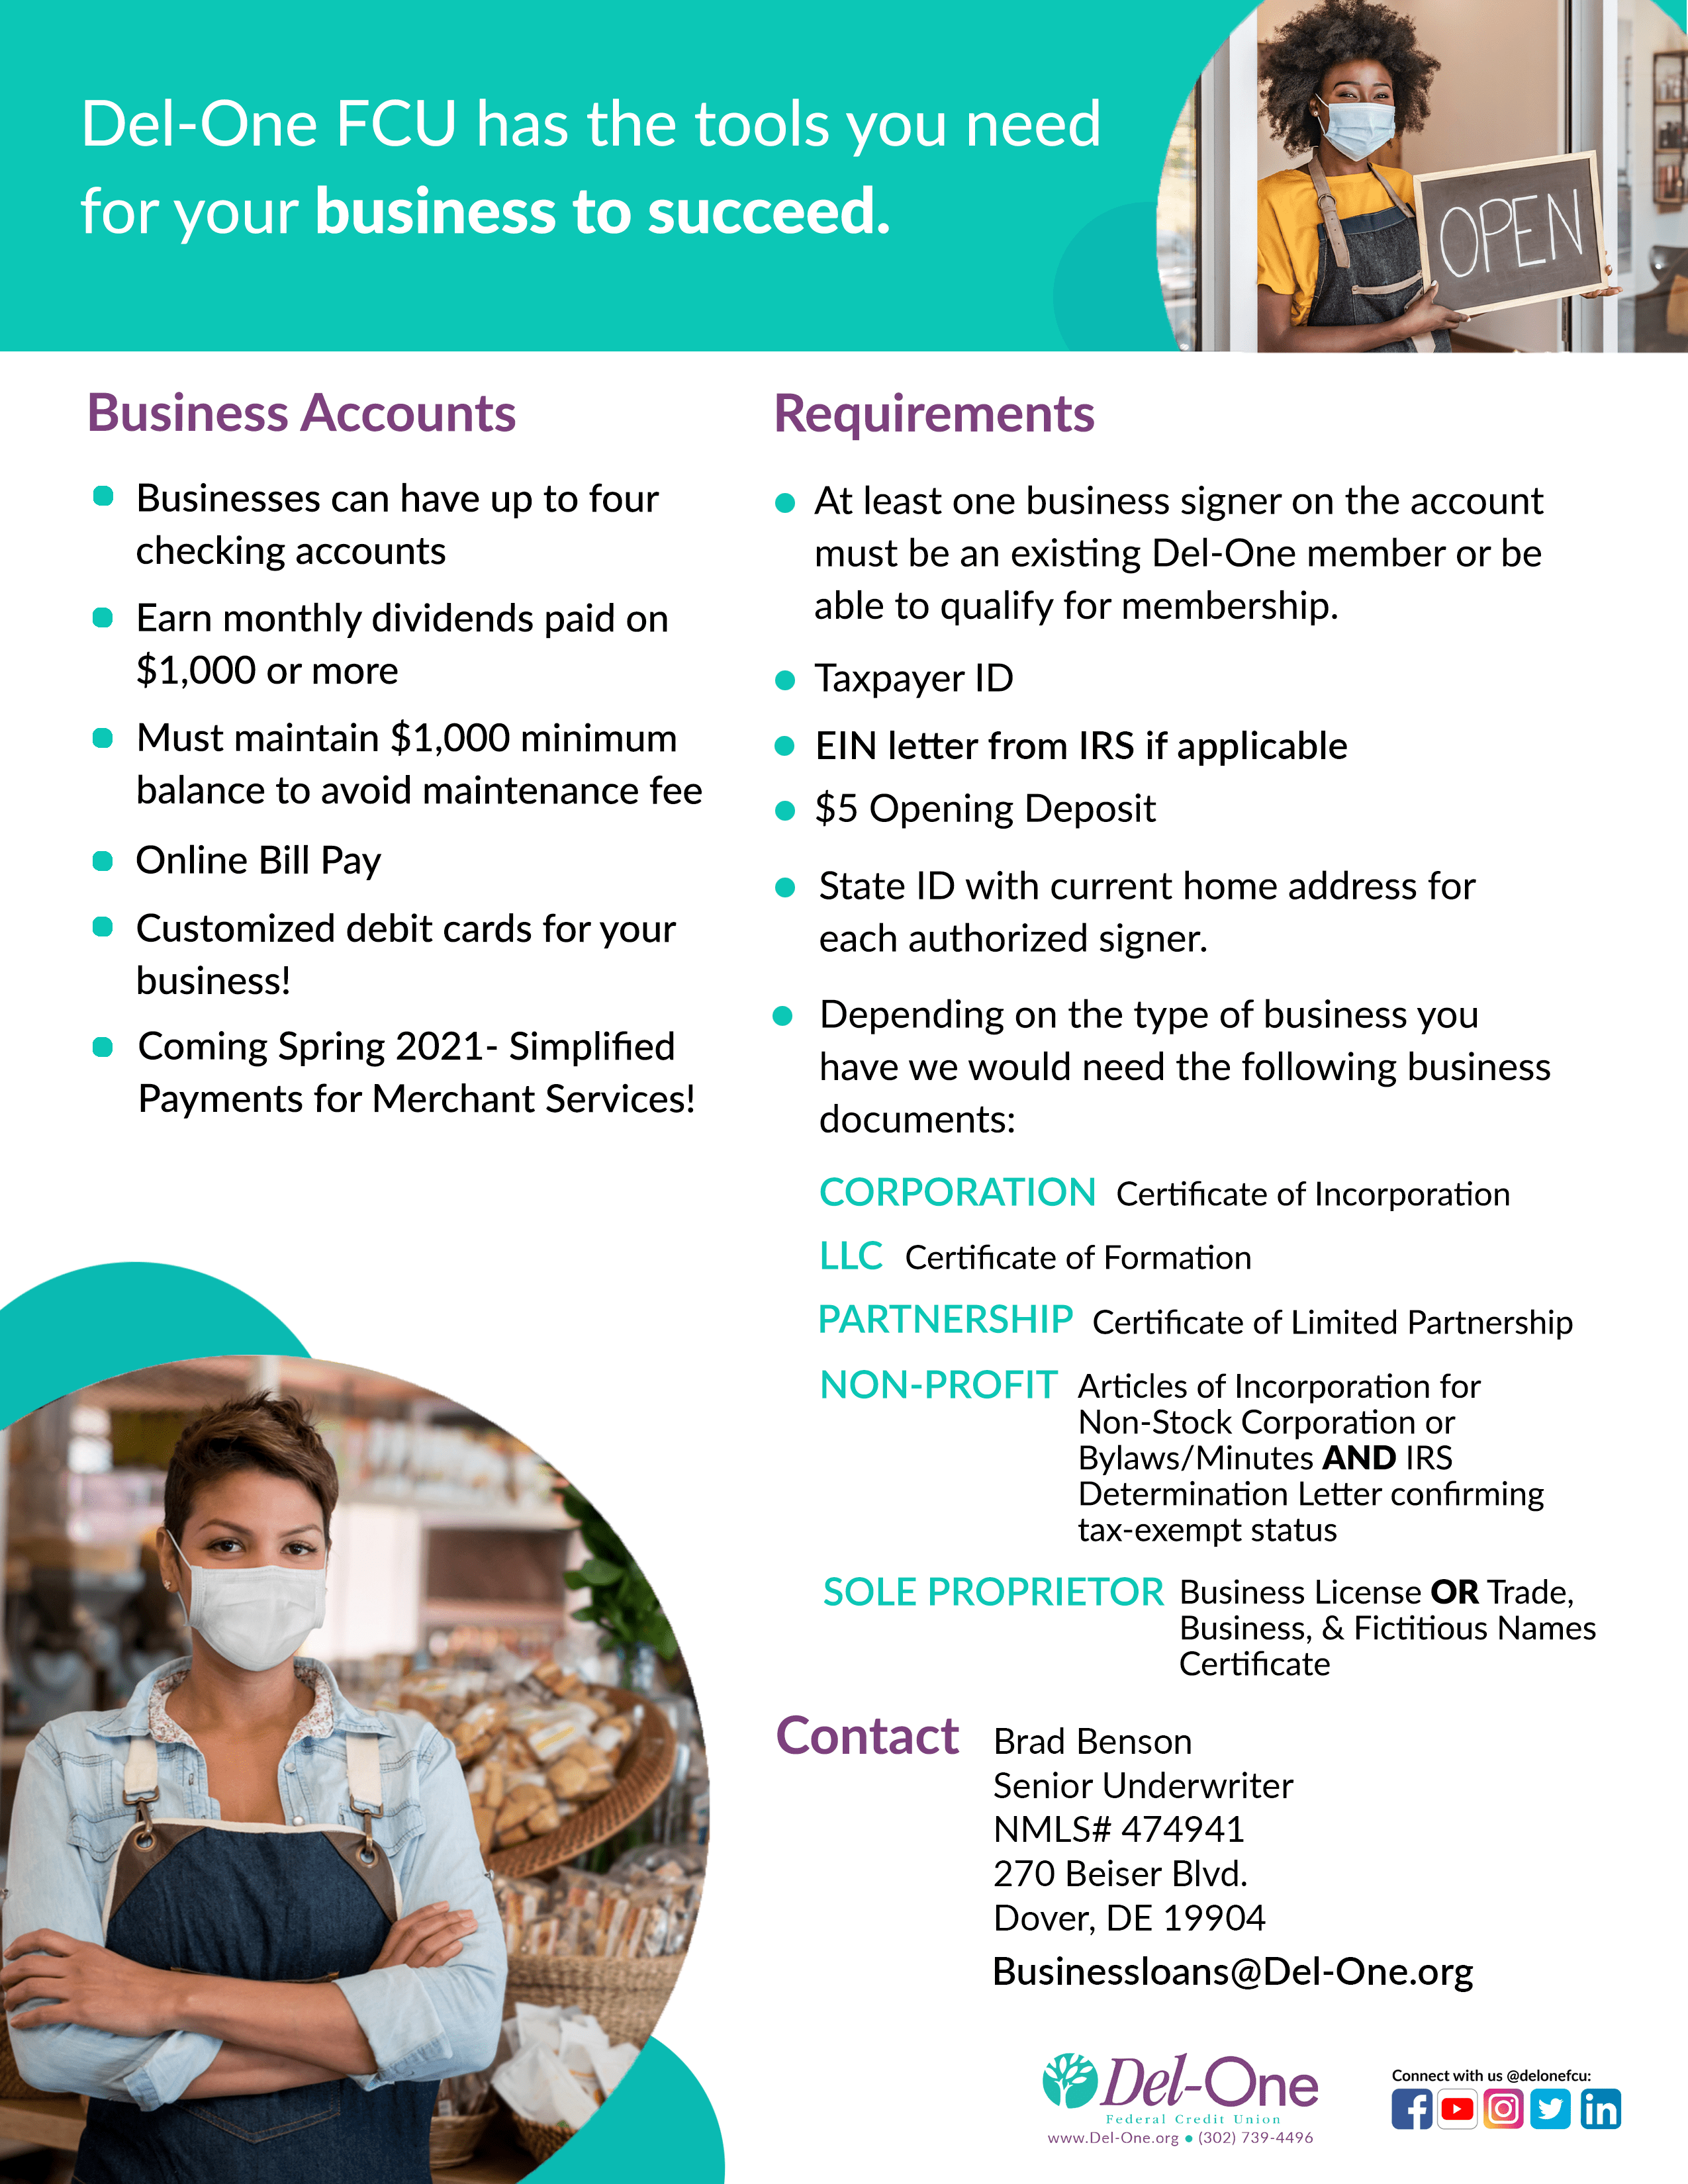 Business Accounts requirements